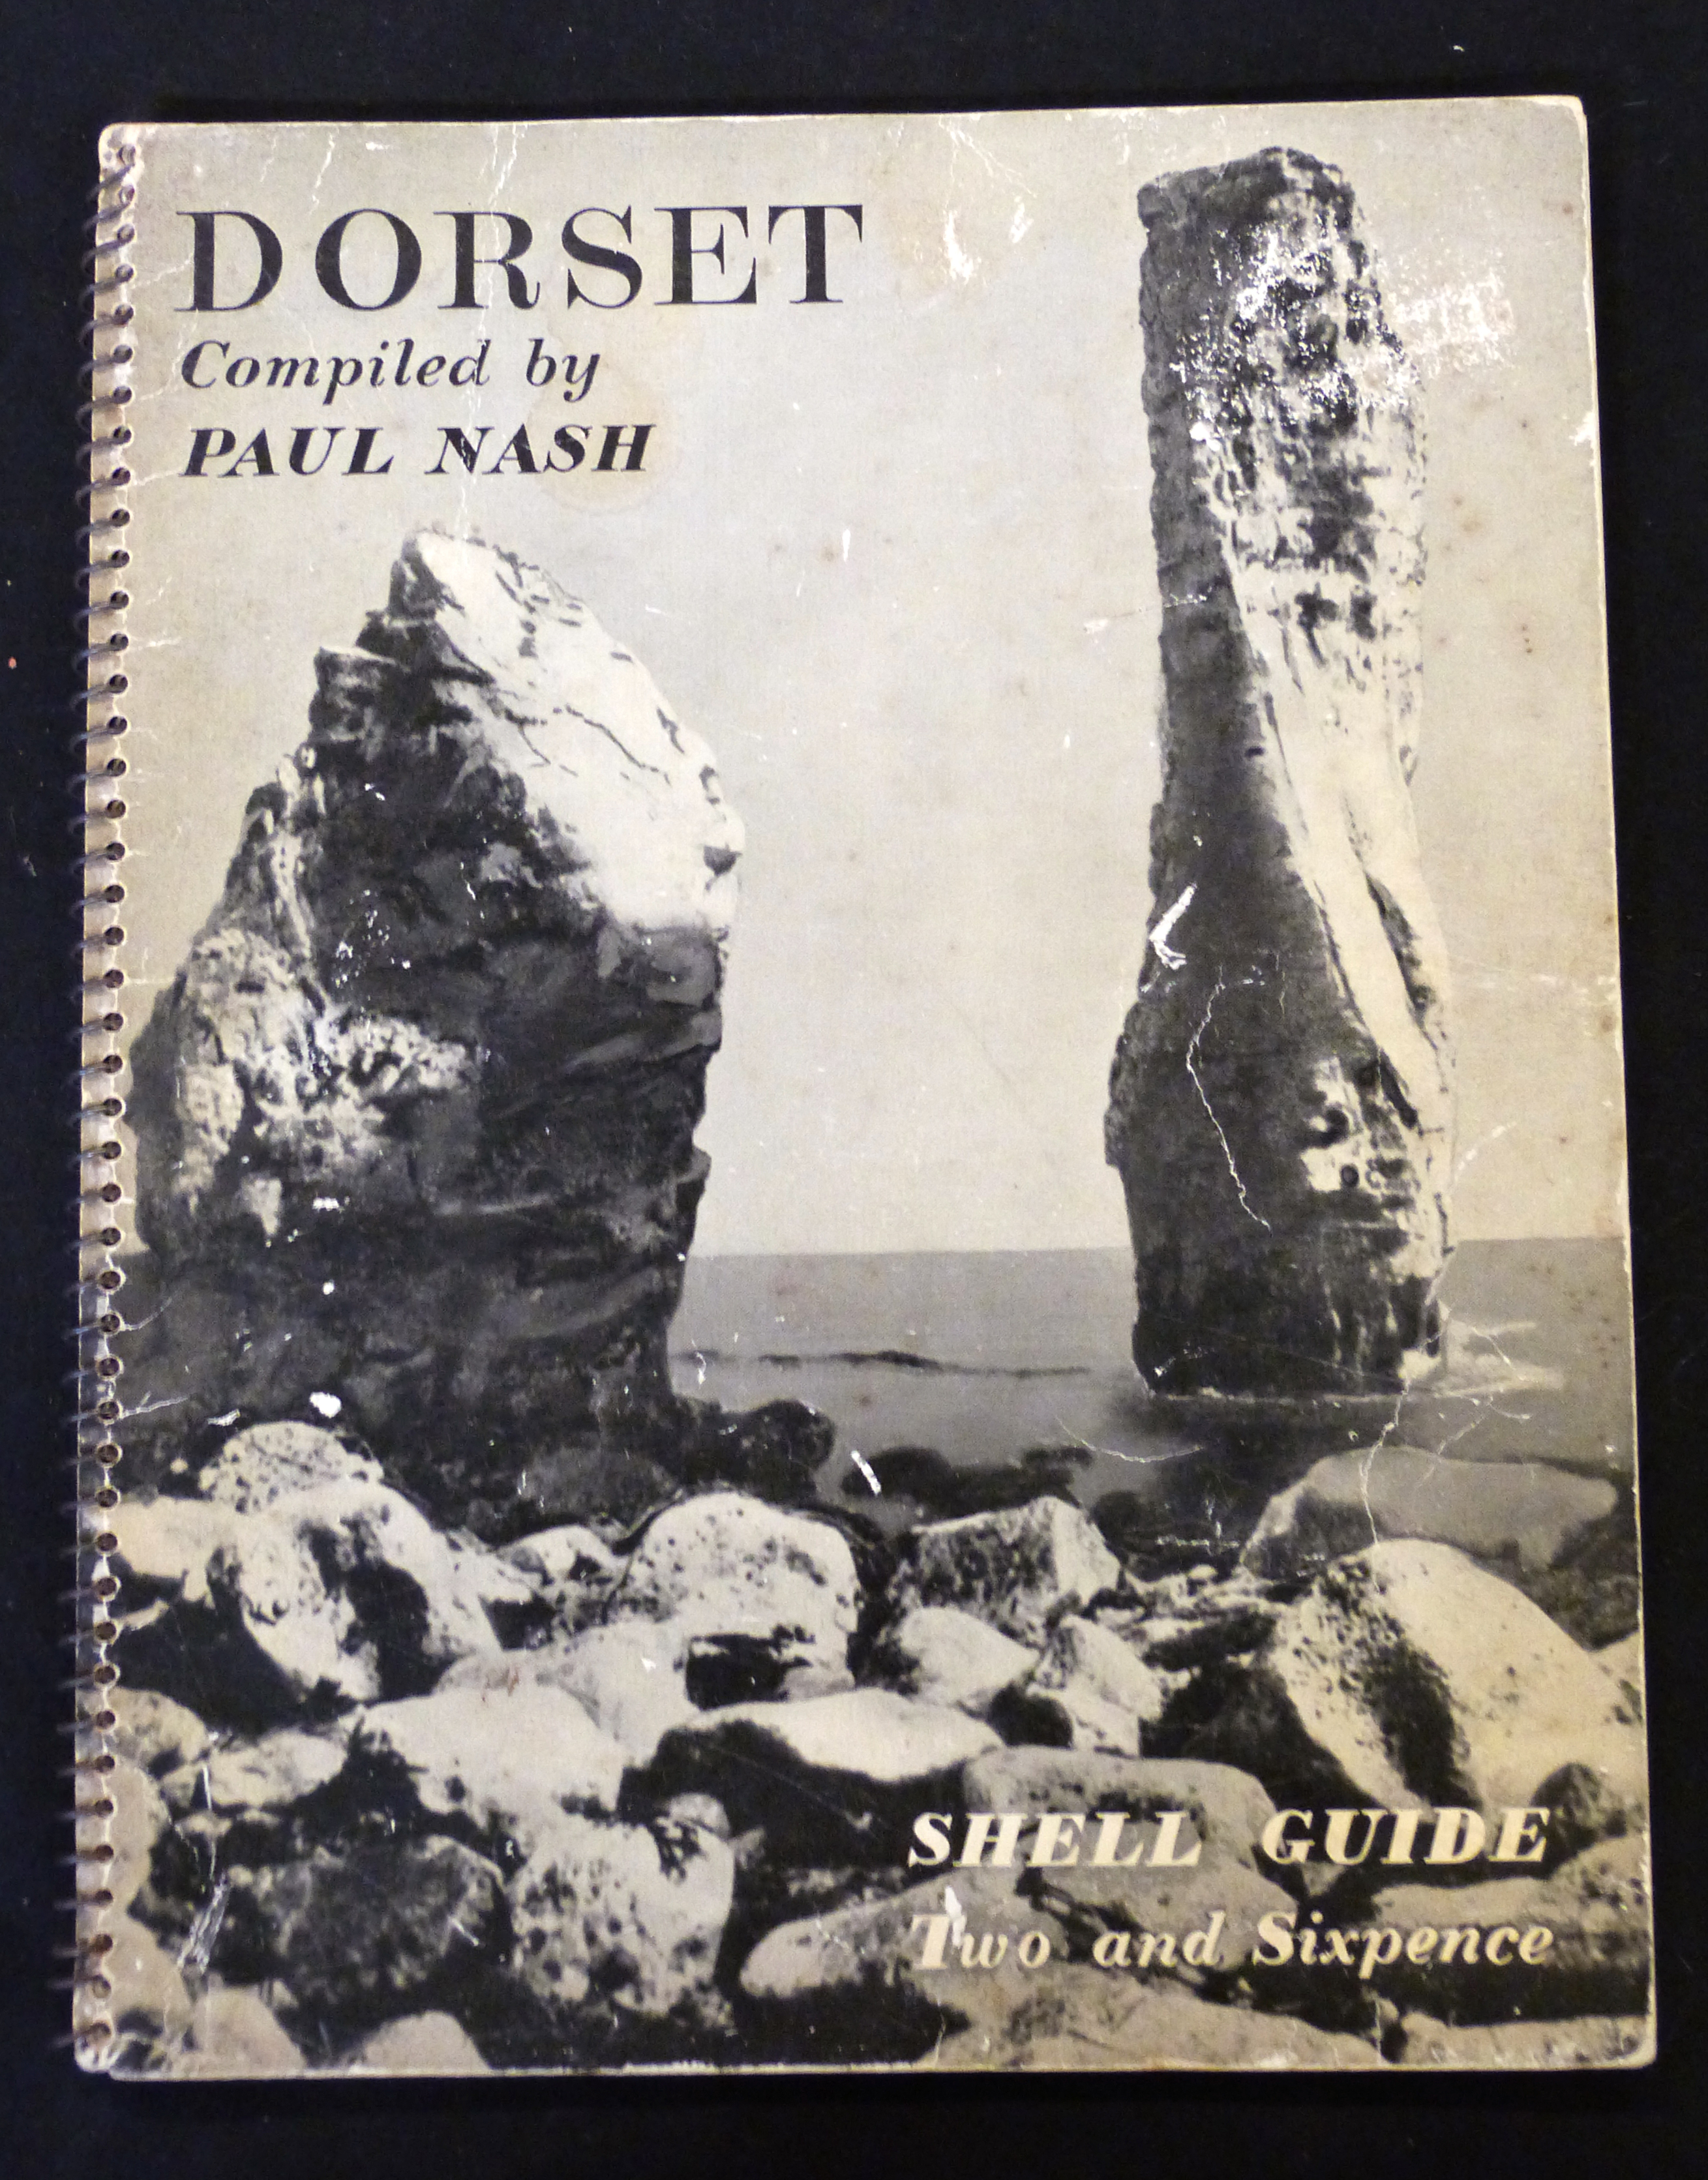 PAUL NASH: DORSET SHELL GUIDE, London, Architectural Press [1936], 1st edition, 4to, spiral bound,